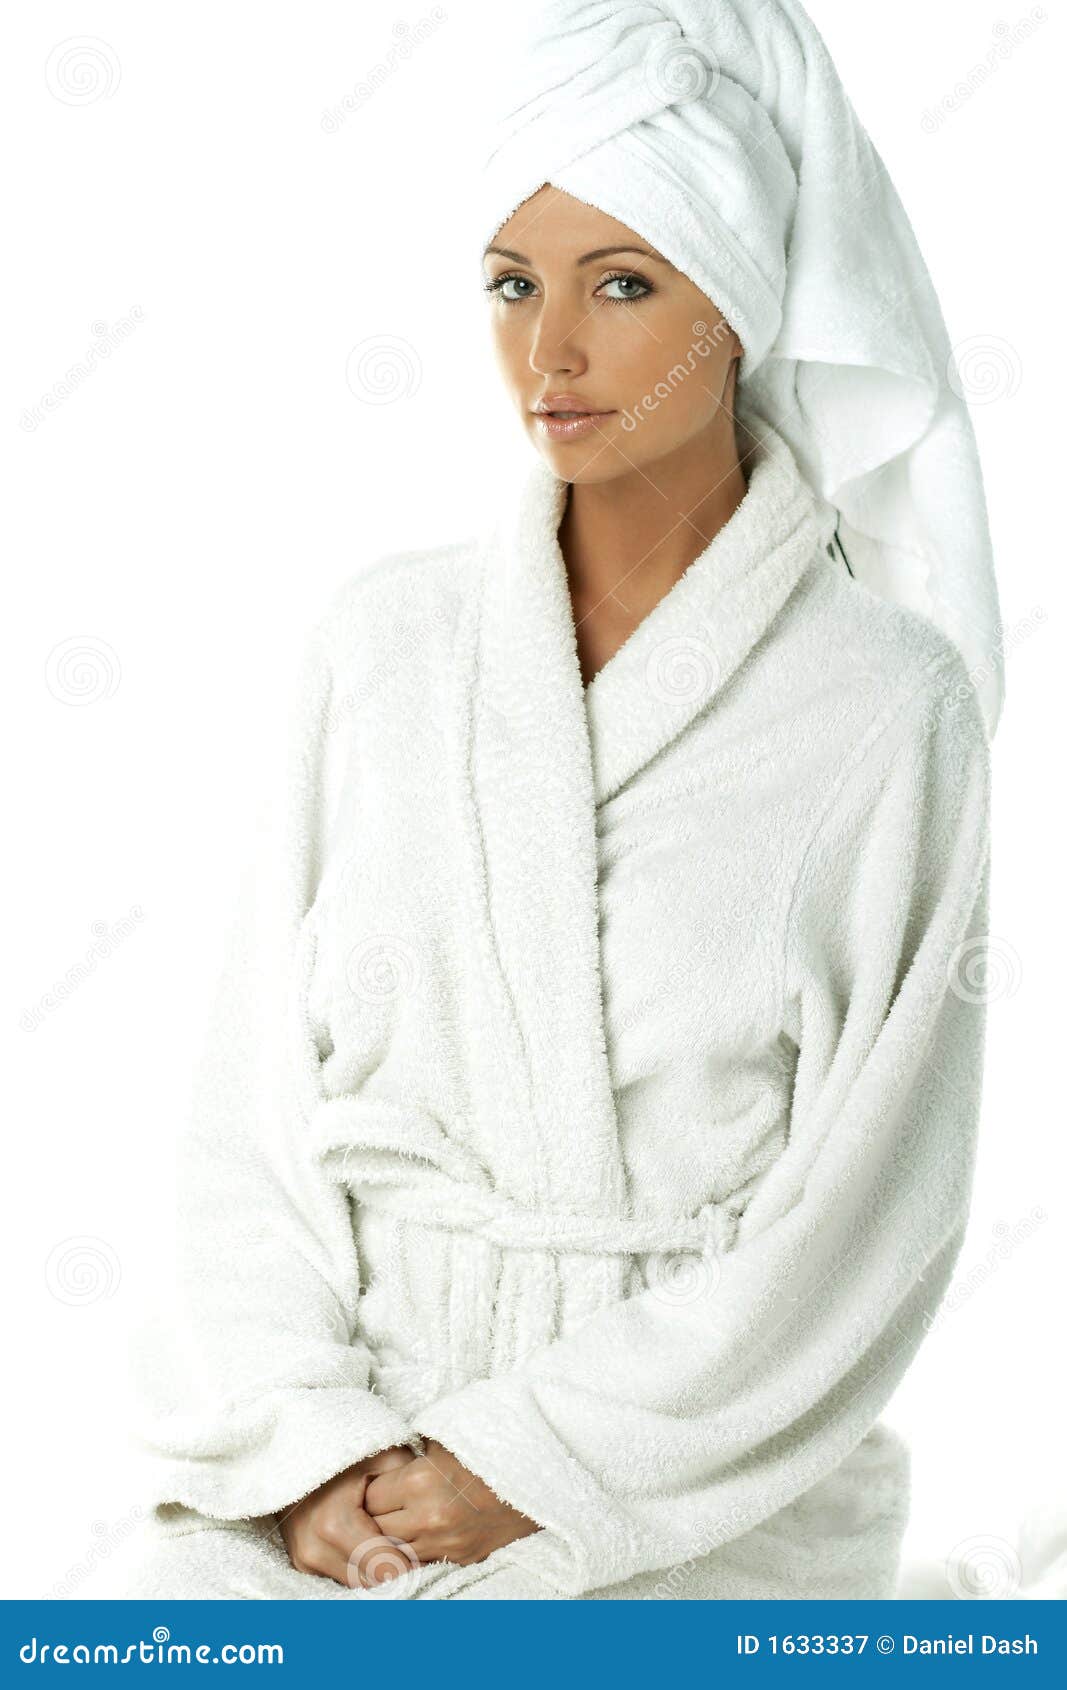 Towel And Robe | vlr.eng.br